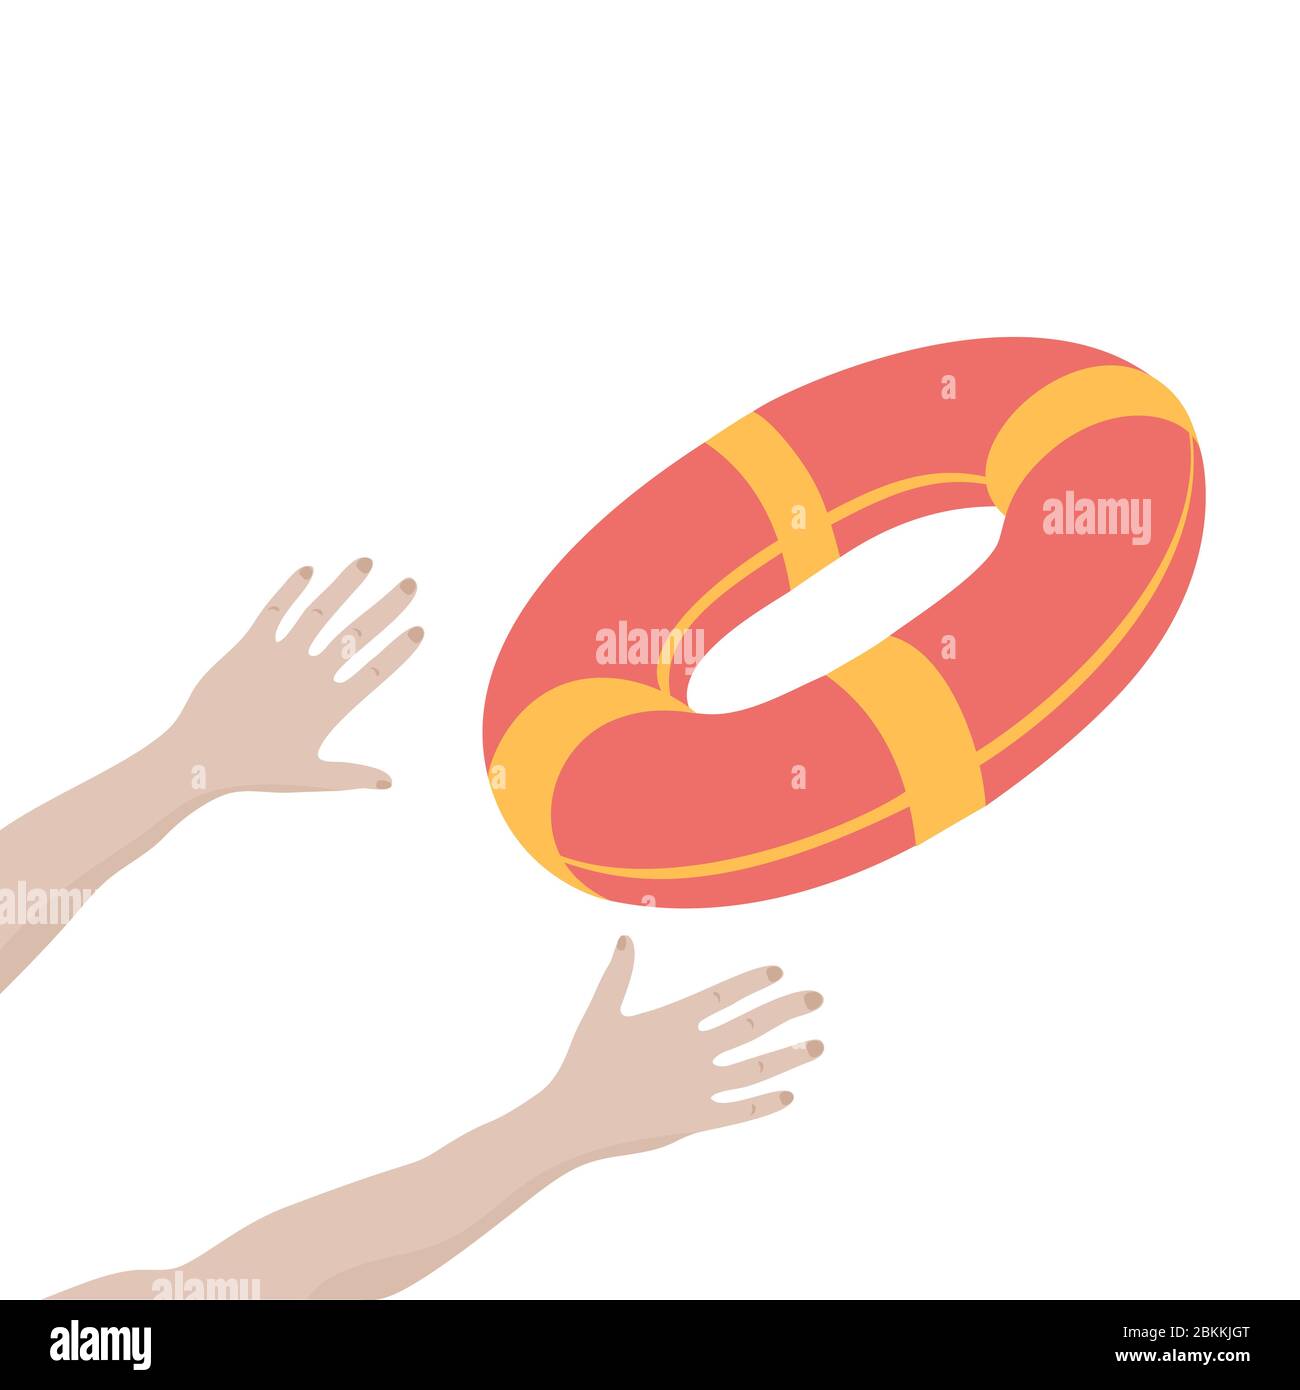 Getting lifebuoy for help, support, and survival. Vector illustration. Stock Vector